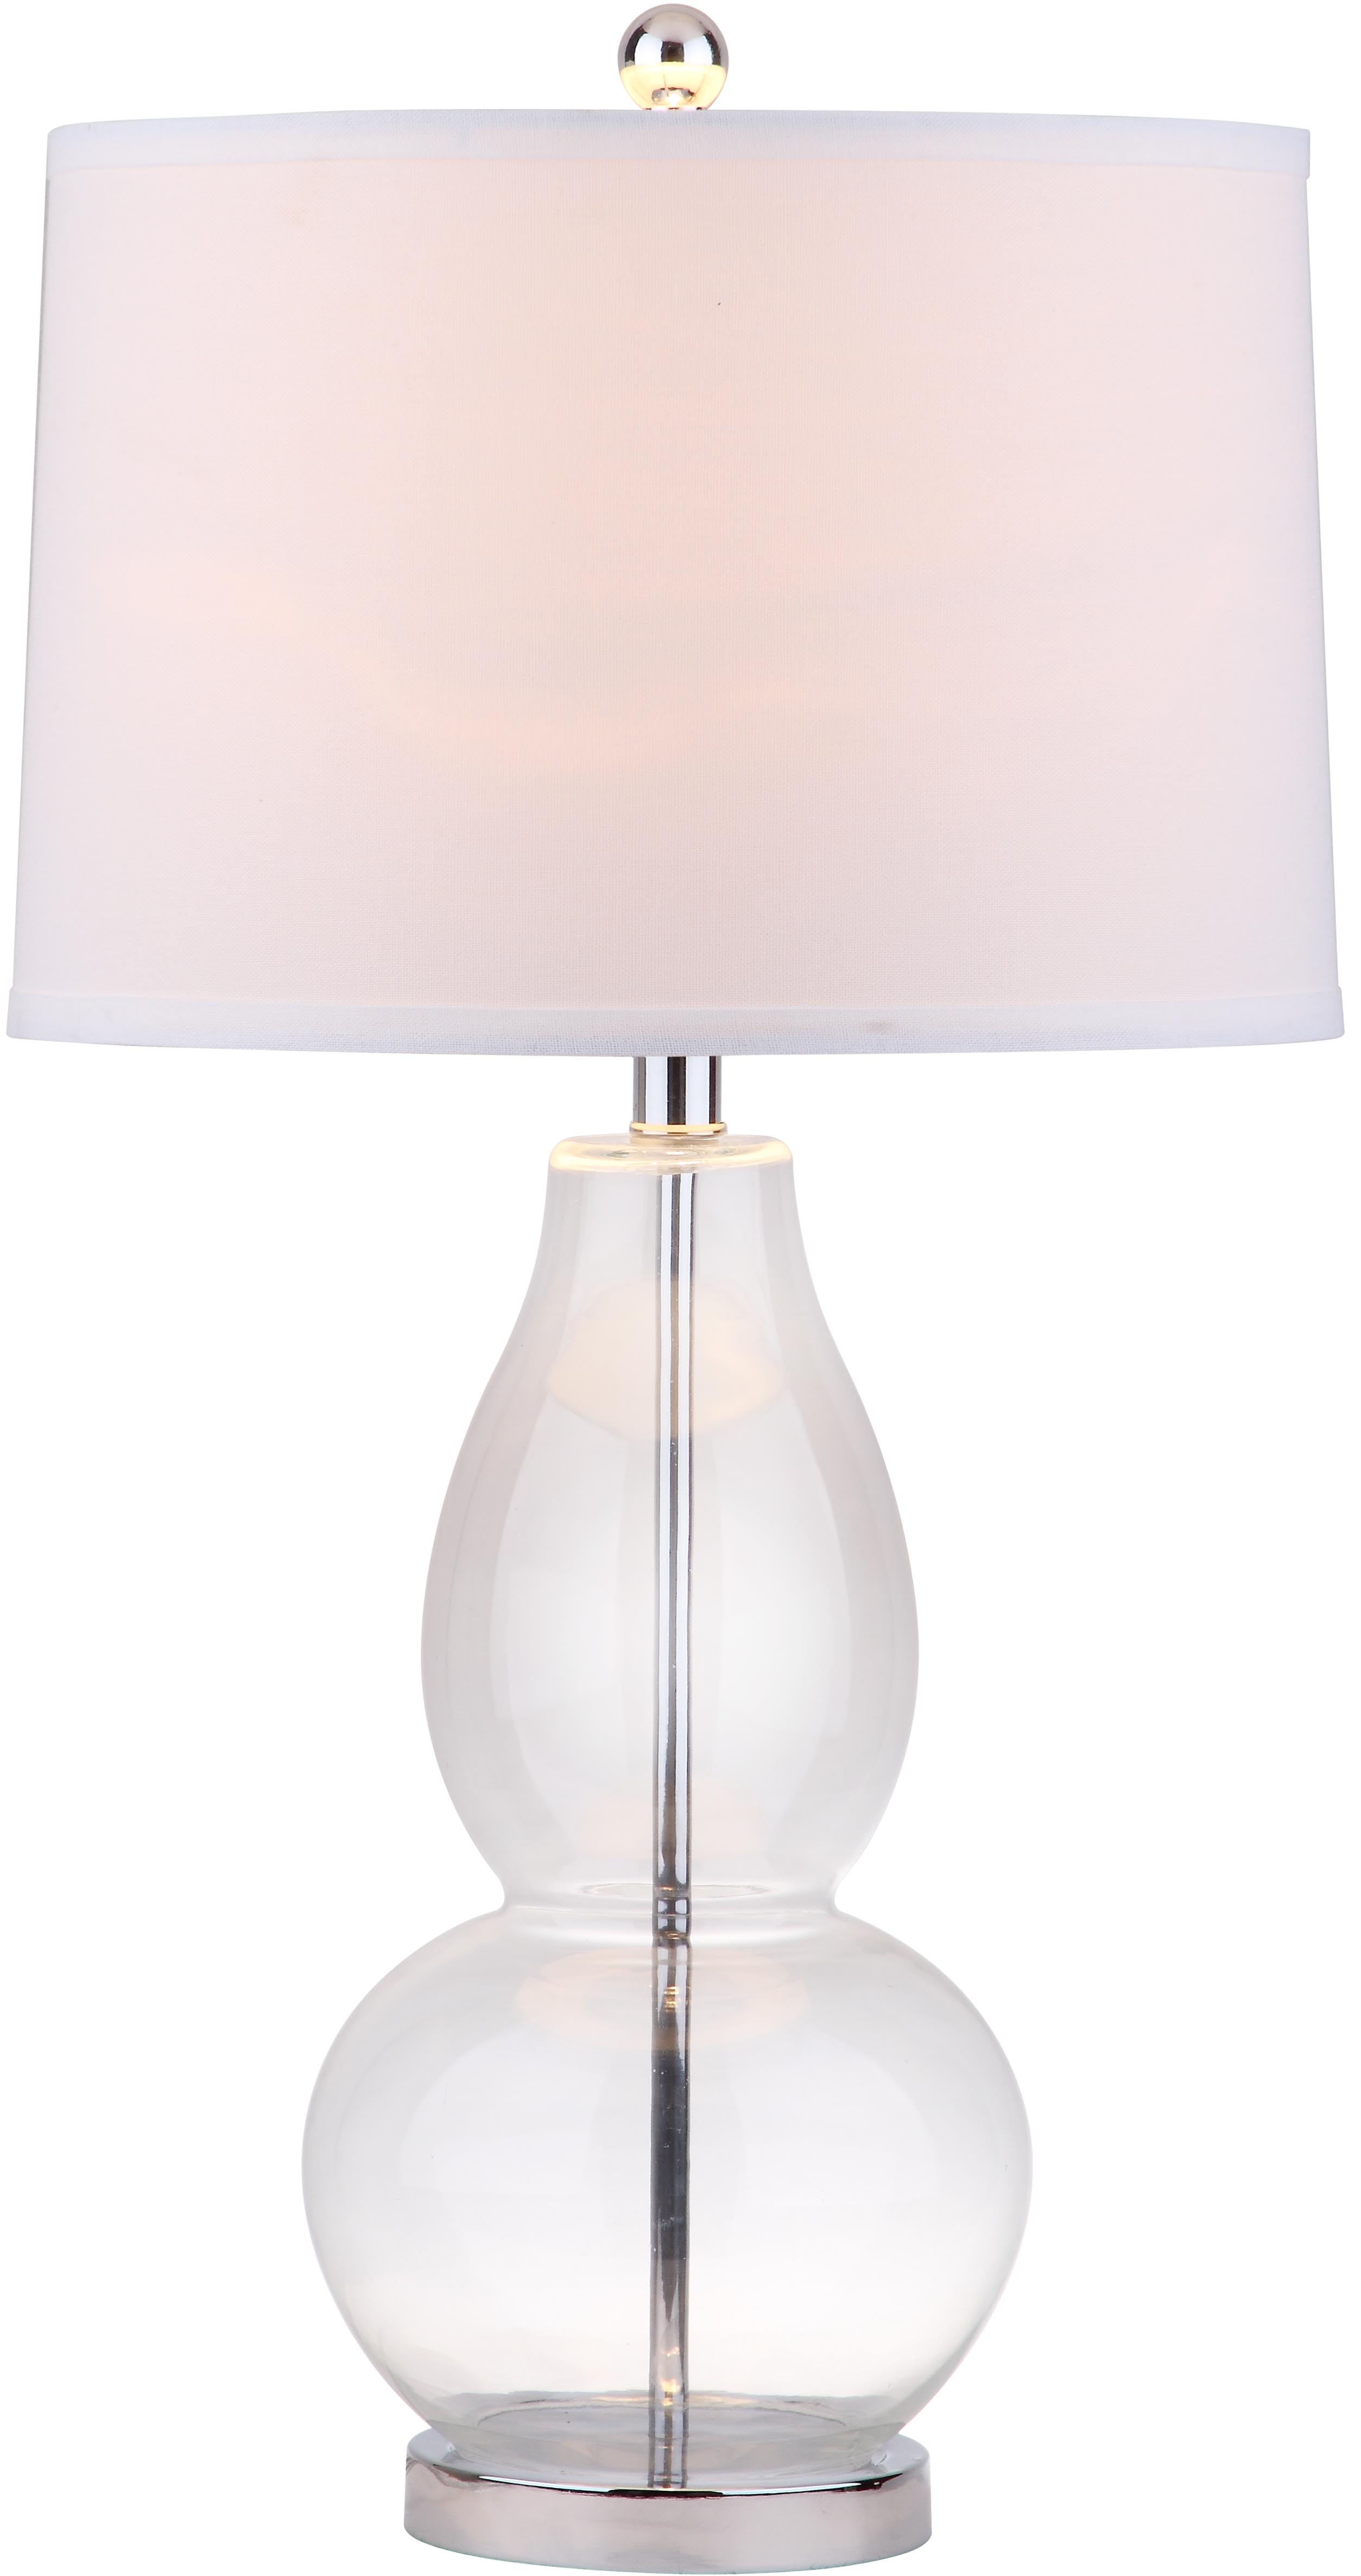 Mercurio 28.5-Inch H Double Gourd Table Lamp - Clear - Safavieh - Image 1